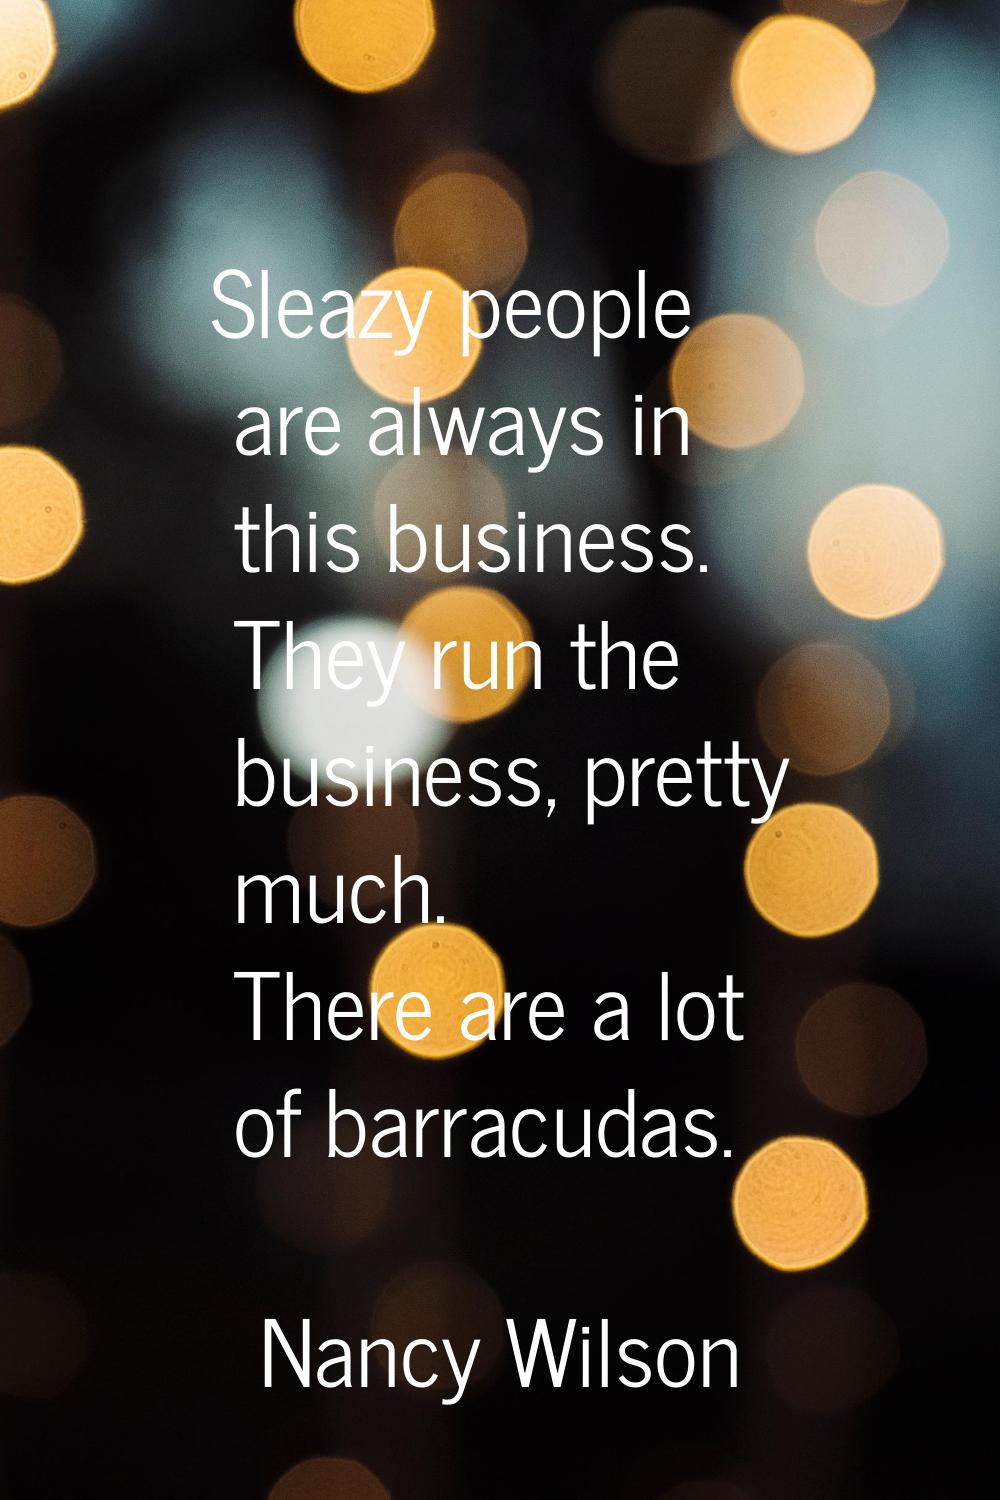 Sleazy people are always in this business. They run the business, pretty much. There are a lot of b